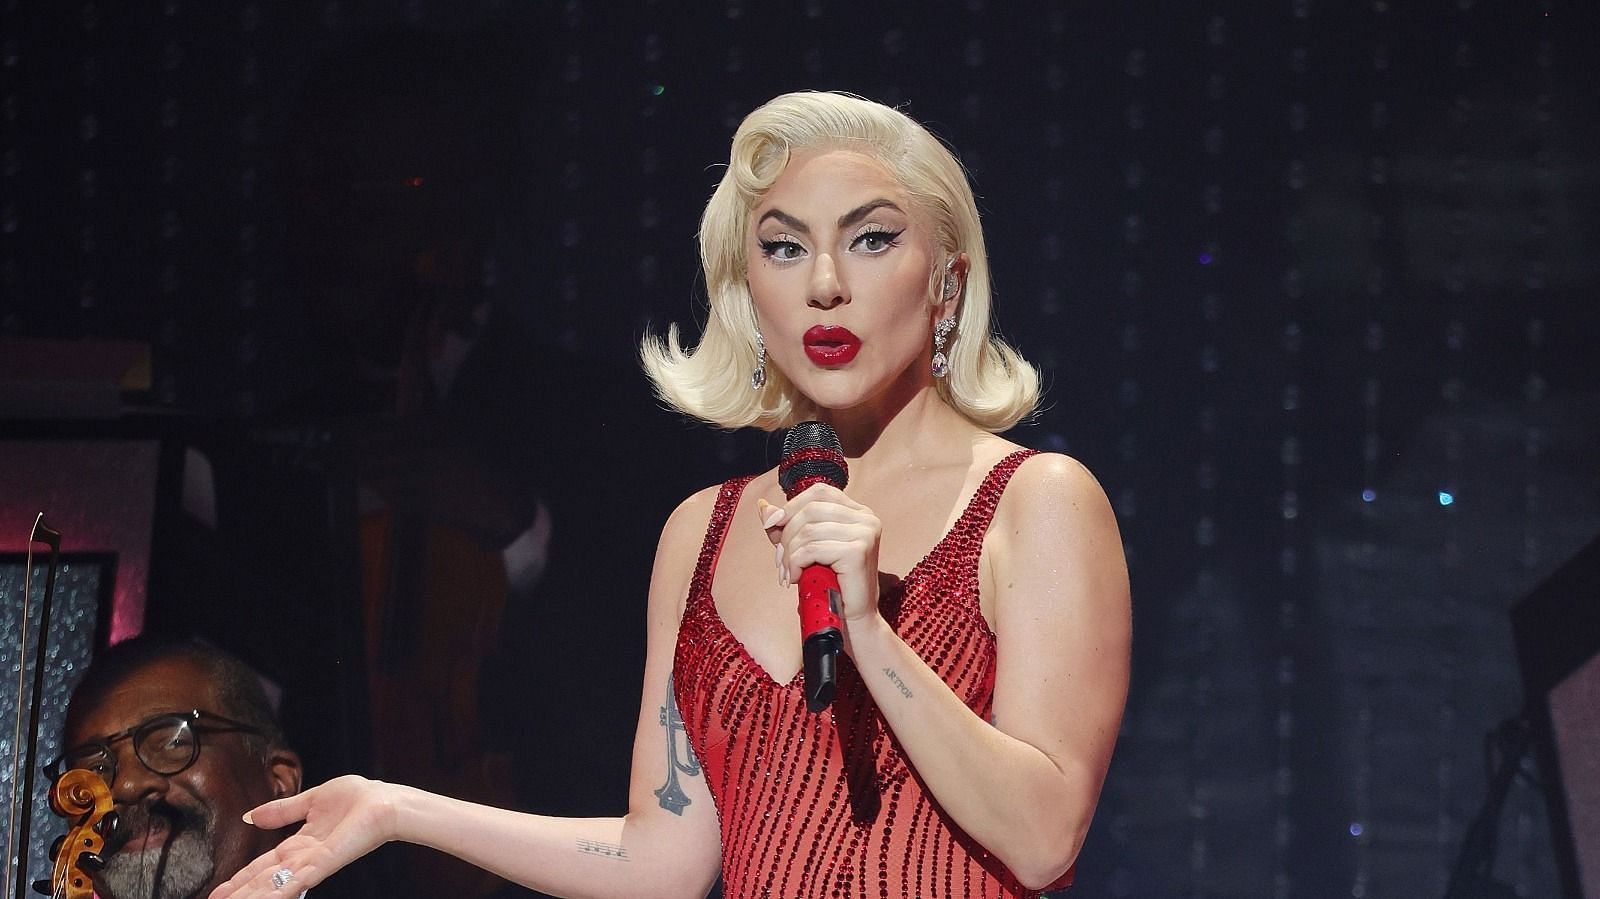 Lady Gaga in Celebrities with mental illness (Image via Getty Images)